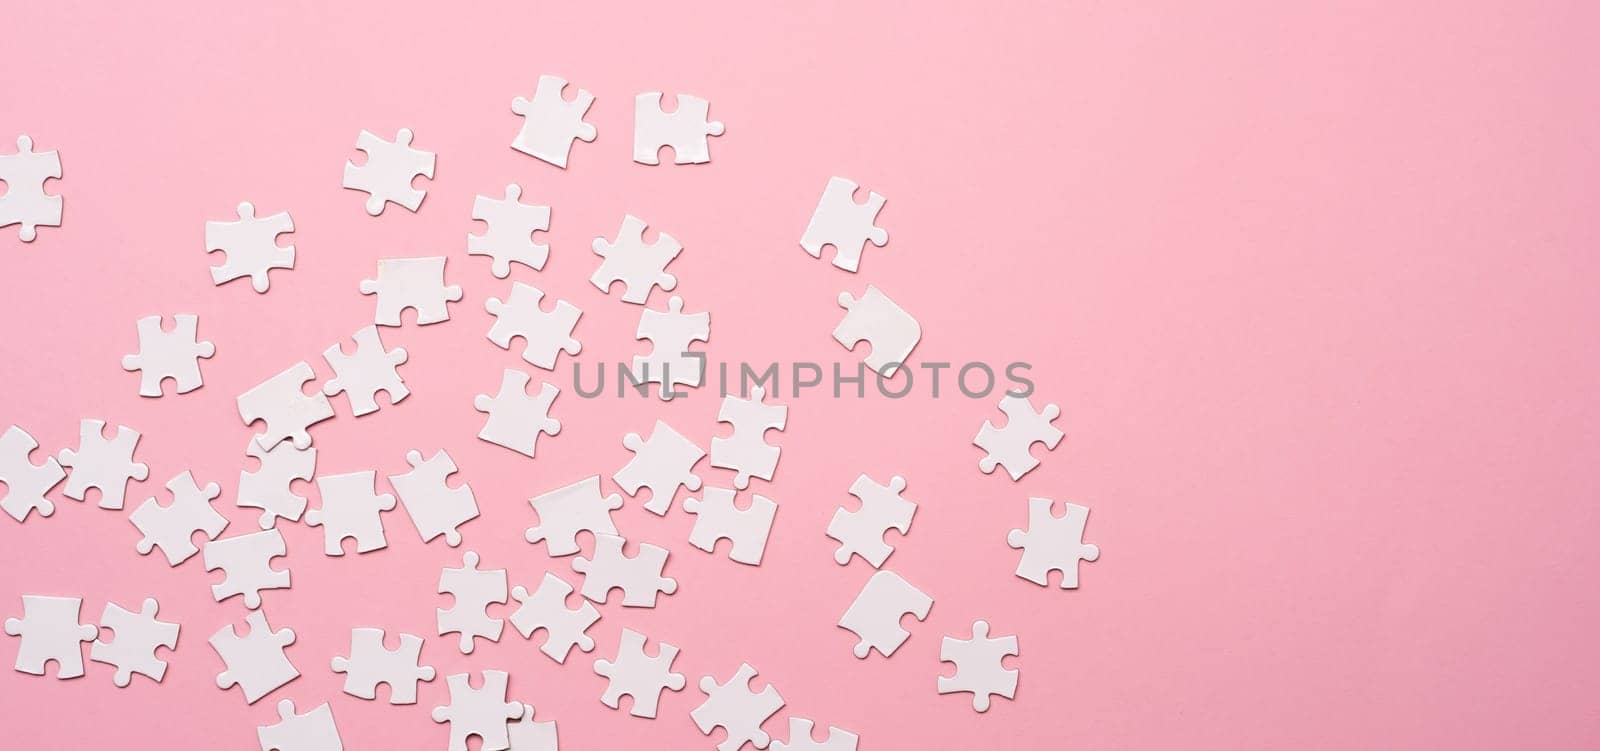 Scattering of white jigsaw puzzle pieces on pink background with copy space, top view